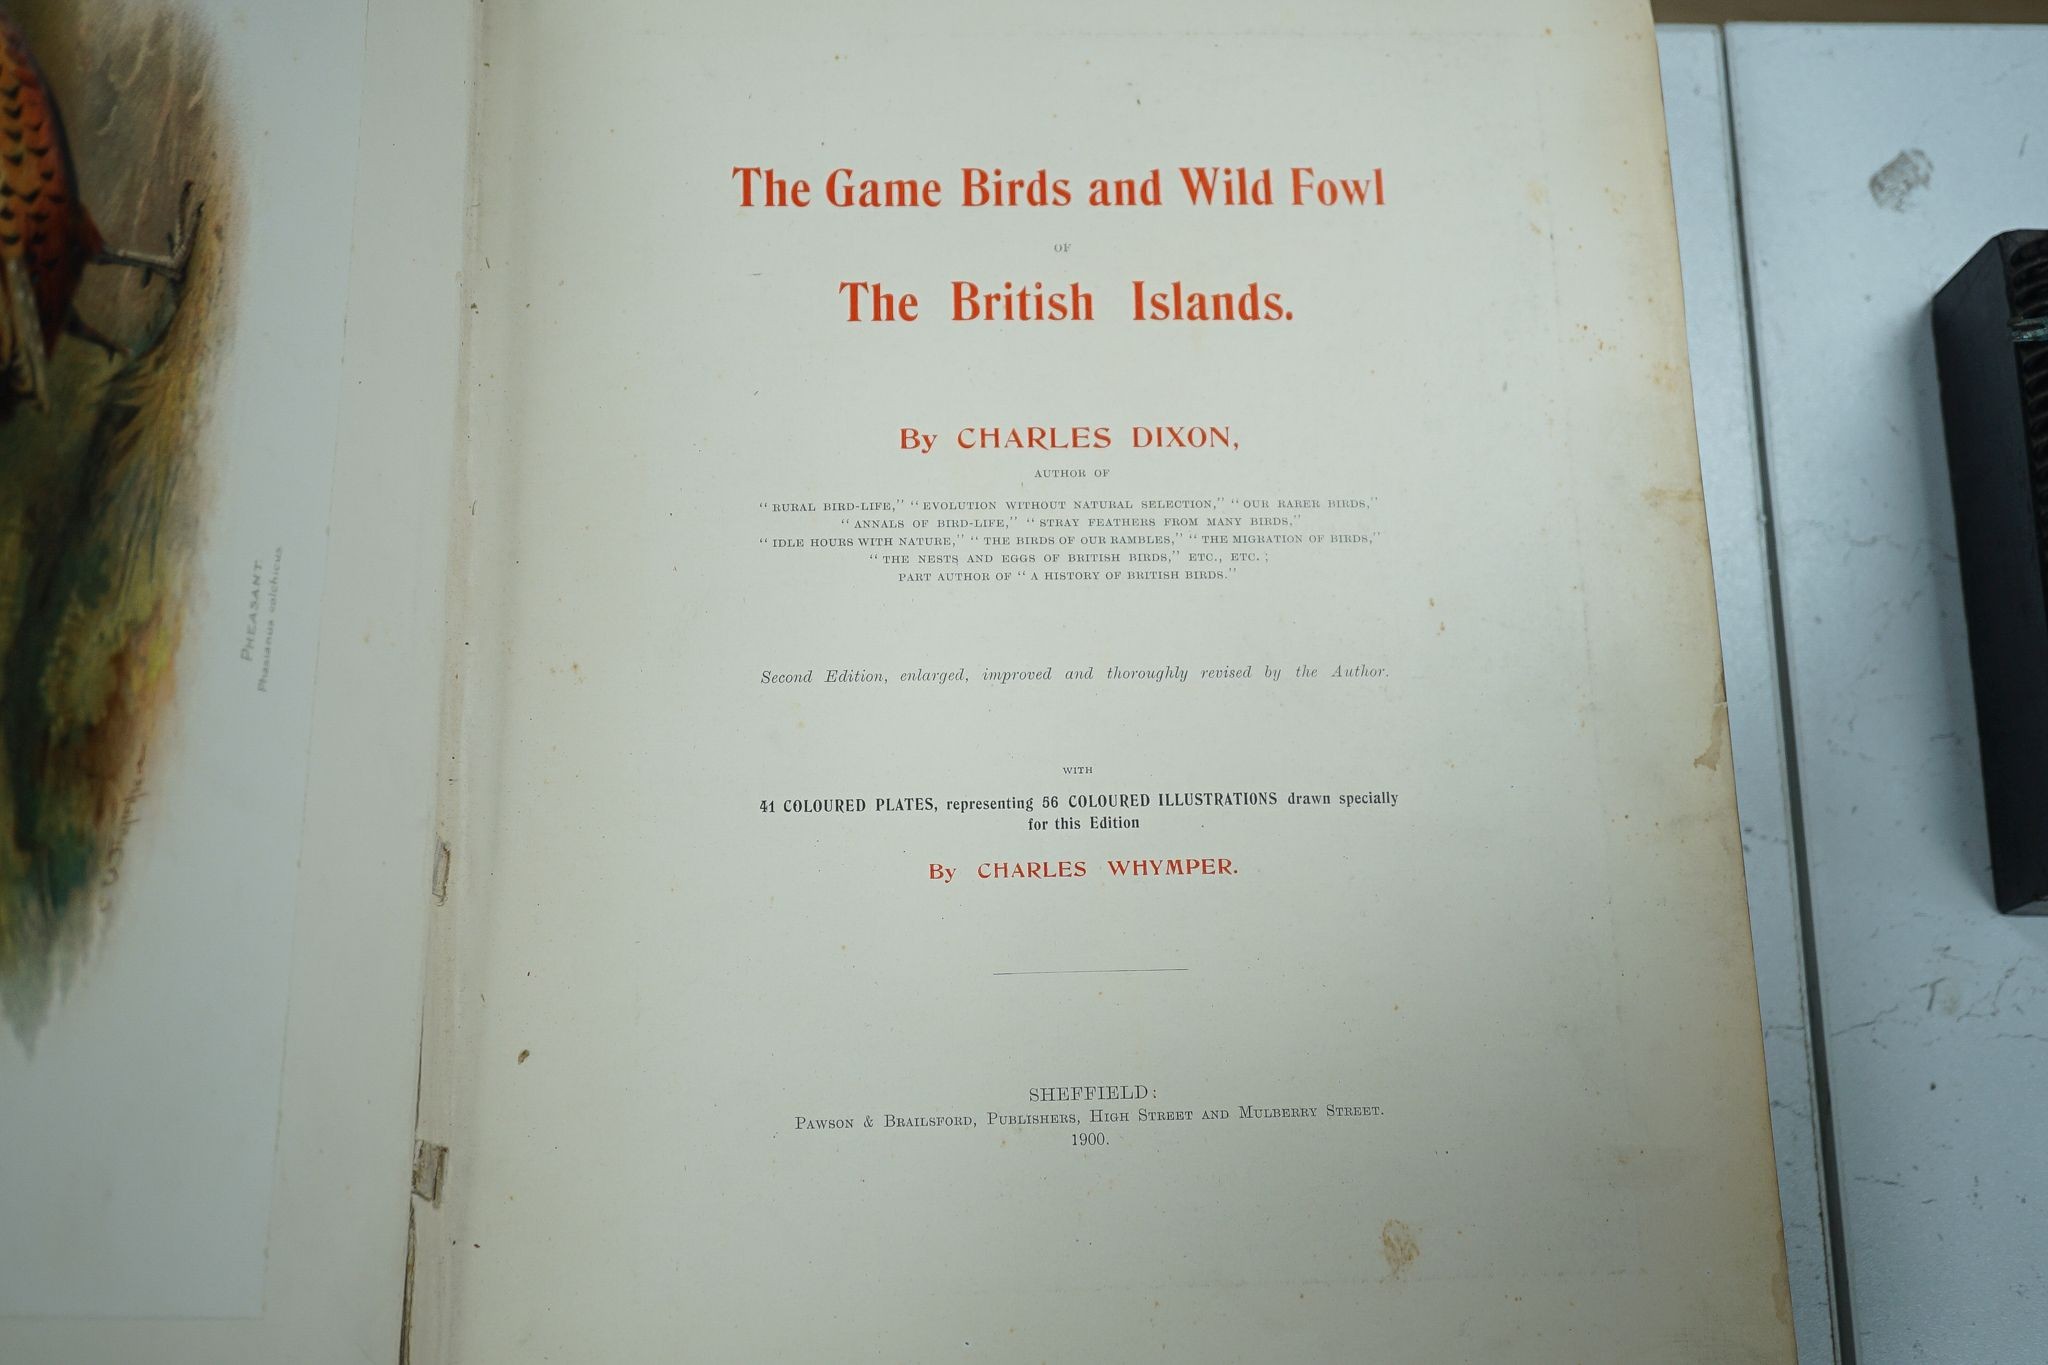 Dixon, Charles - The Game Birds and Wild Fowl of the British Islands. Edition de Luxe (of 100 numbered copies) of the 2nd (enlarged, improved and thorough revised) edition. 41 coloured plates (by Charles Whymper) mounted